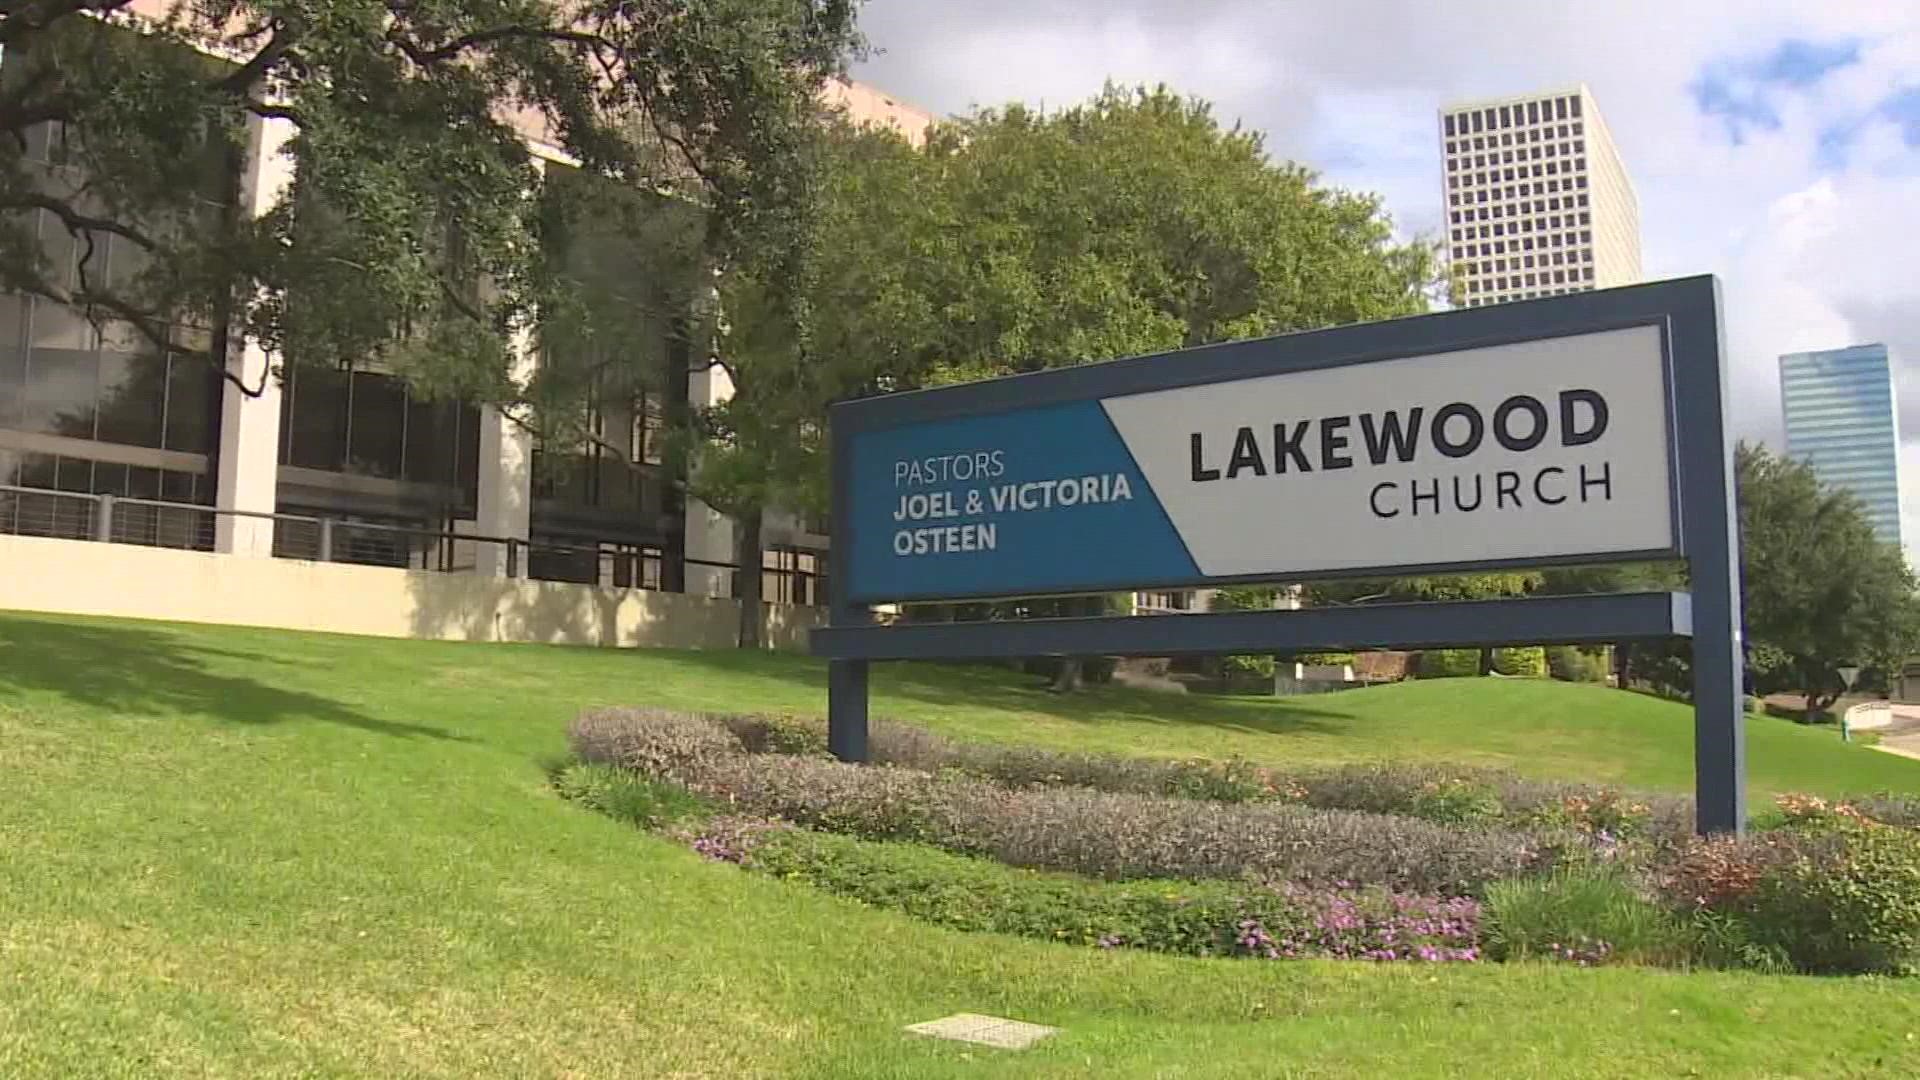 Lakewood Church told KHOU 11 News they did thank the person who found the money several times that day.